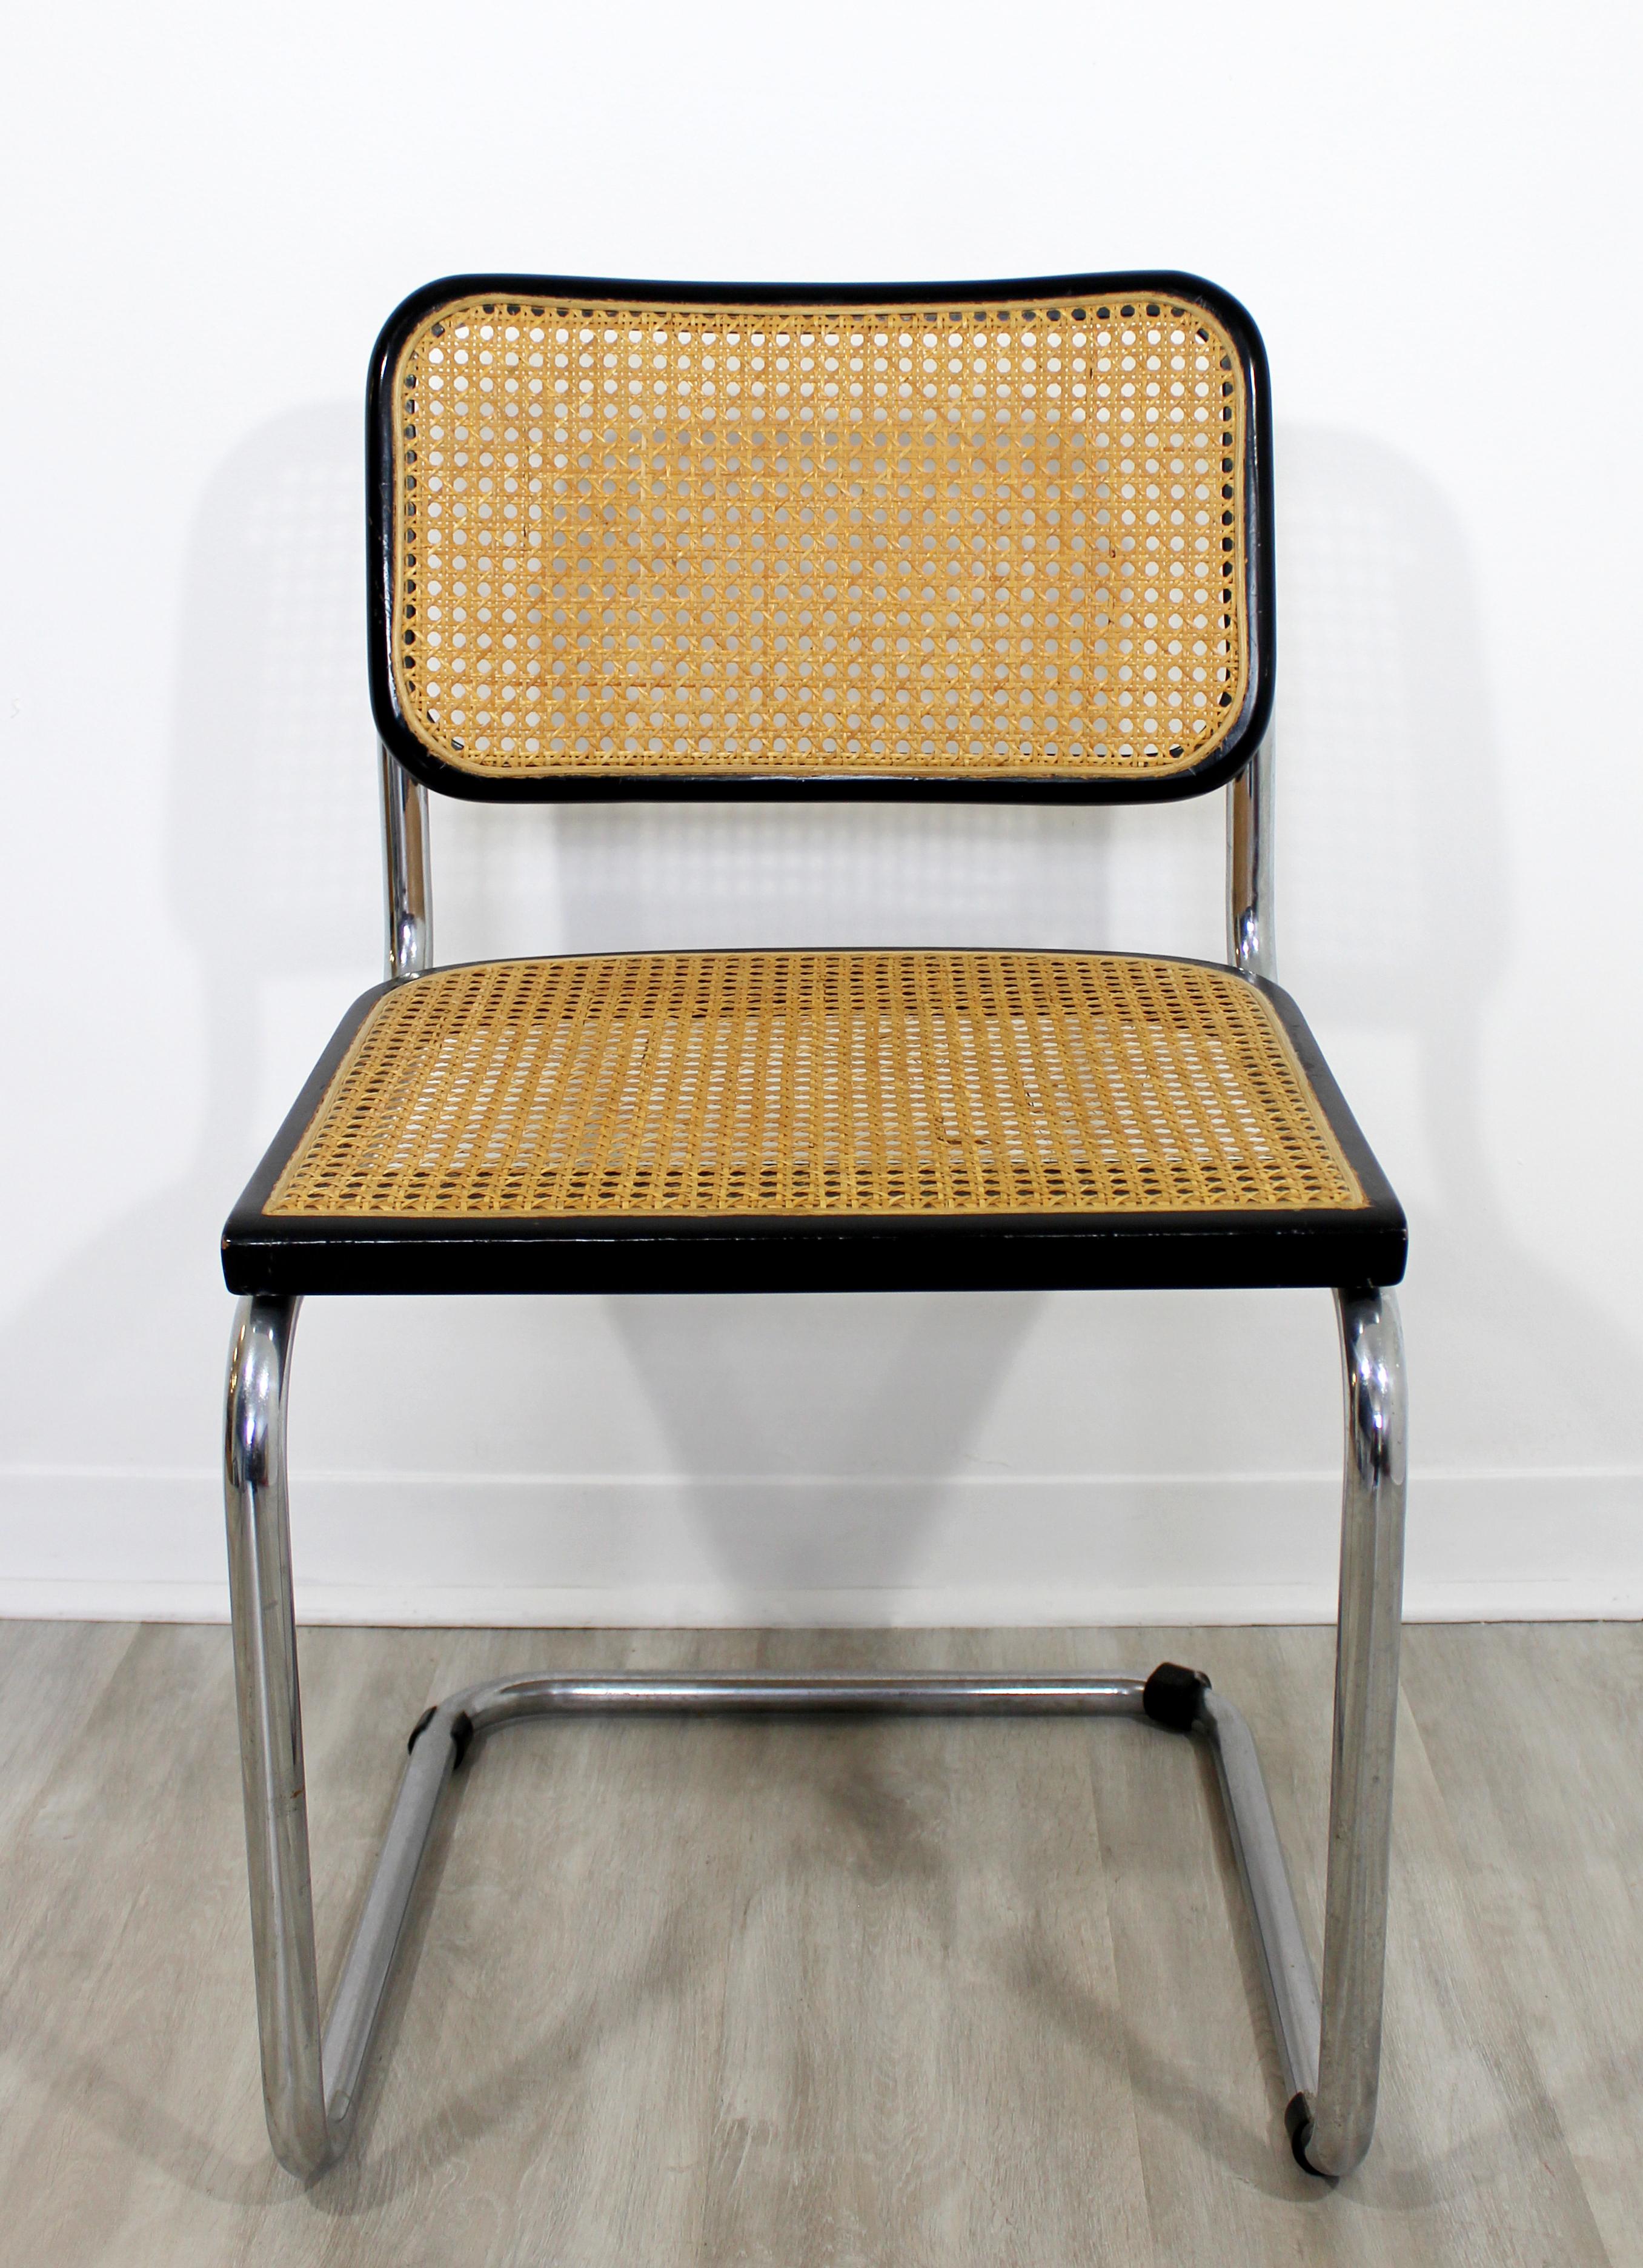 For your consideration is an incredible side chair, made of cantilvered chrome, cane and black lacquered wood, by Marcel Breuer, circa 1960s. In excellent vintage condition. The dimensions are 18